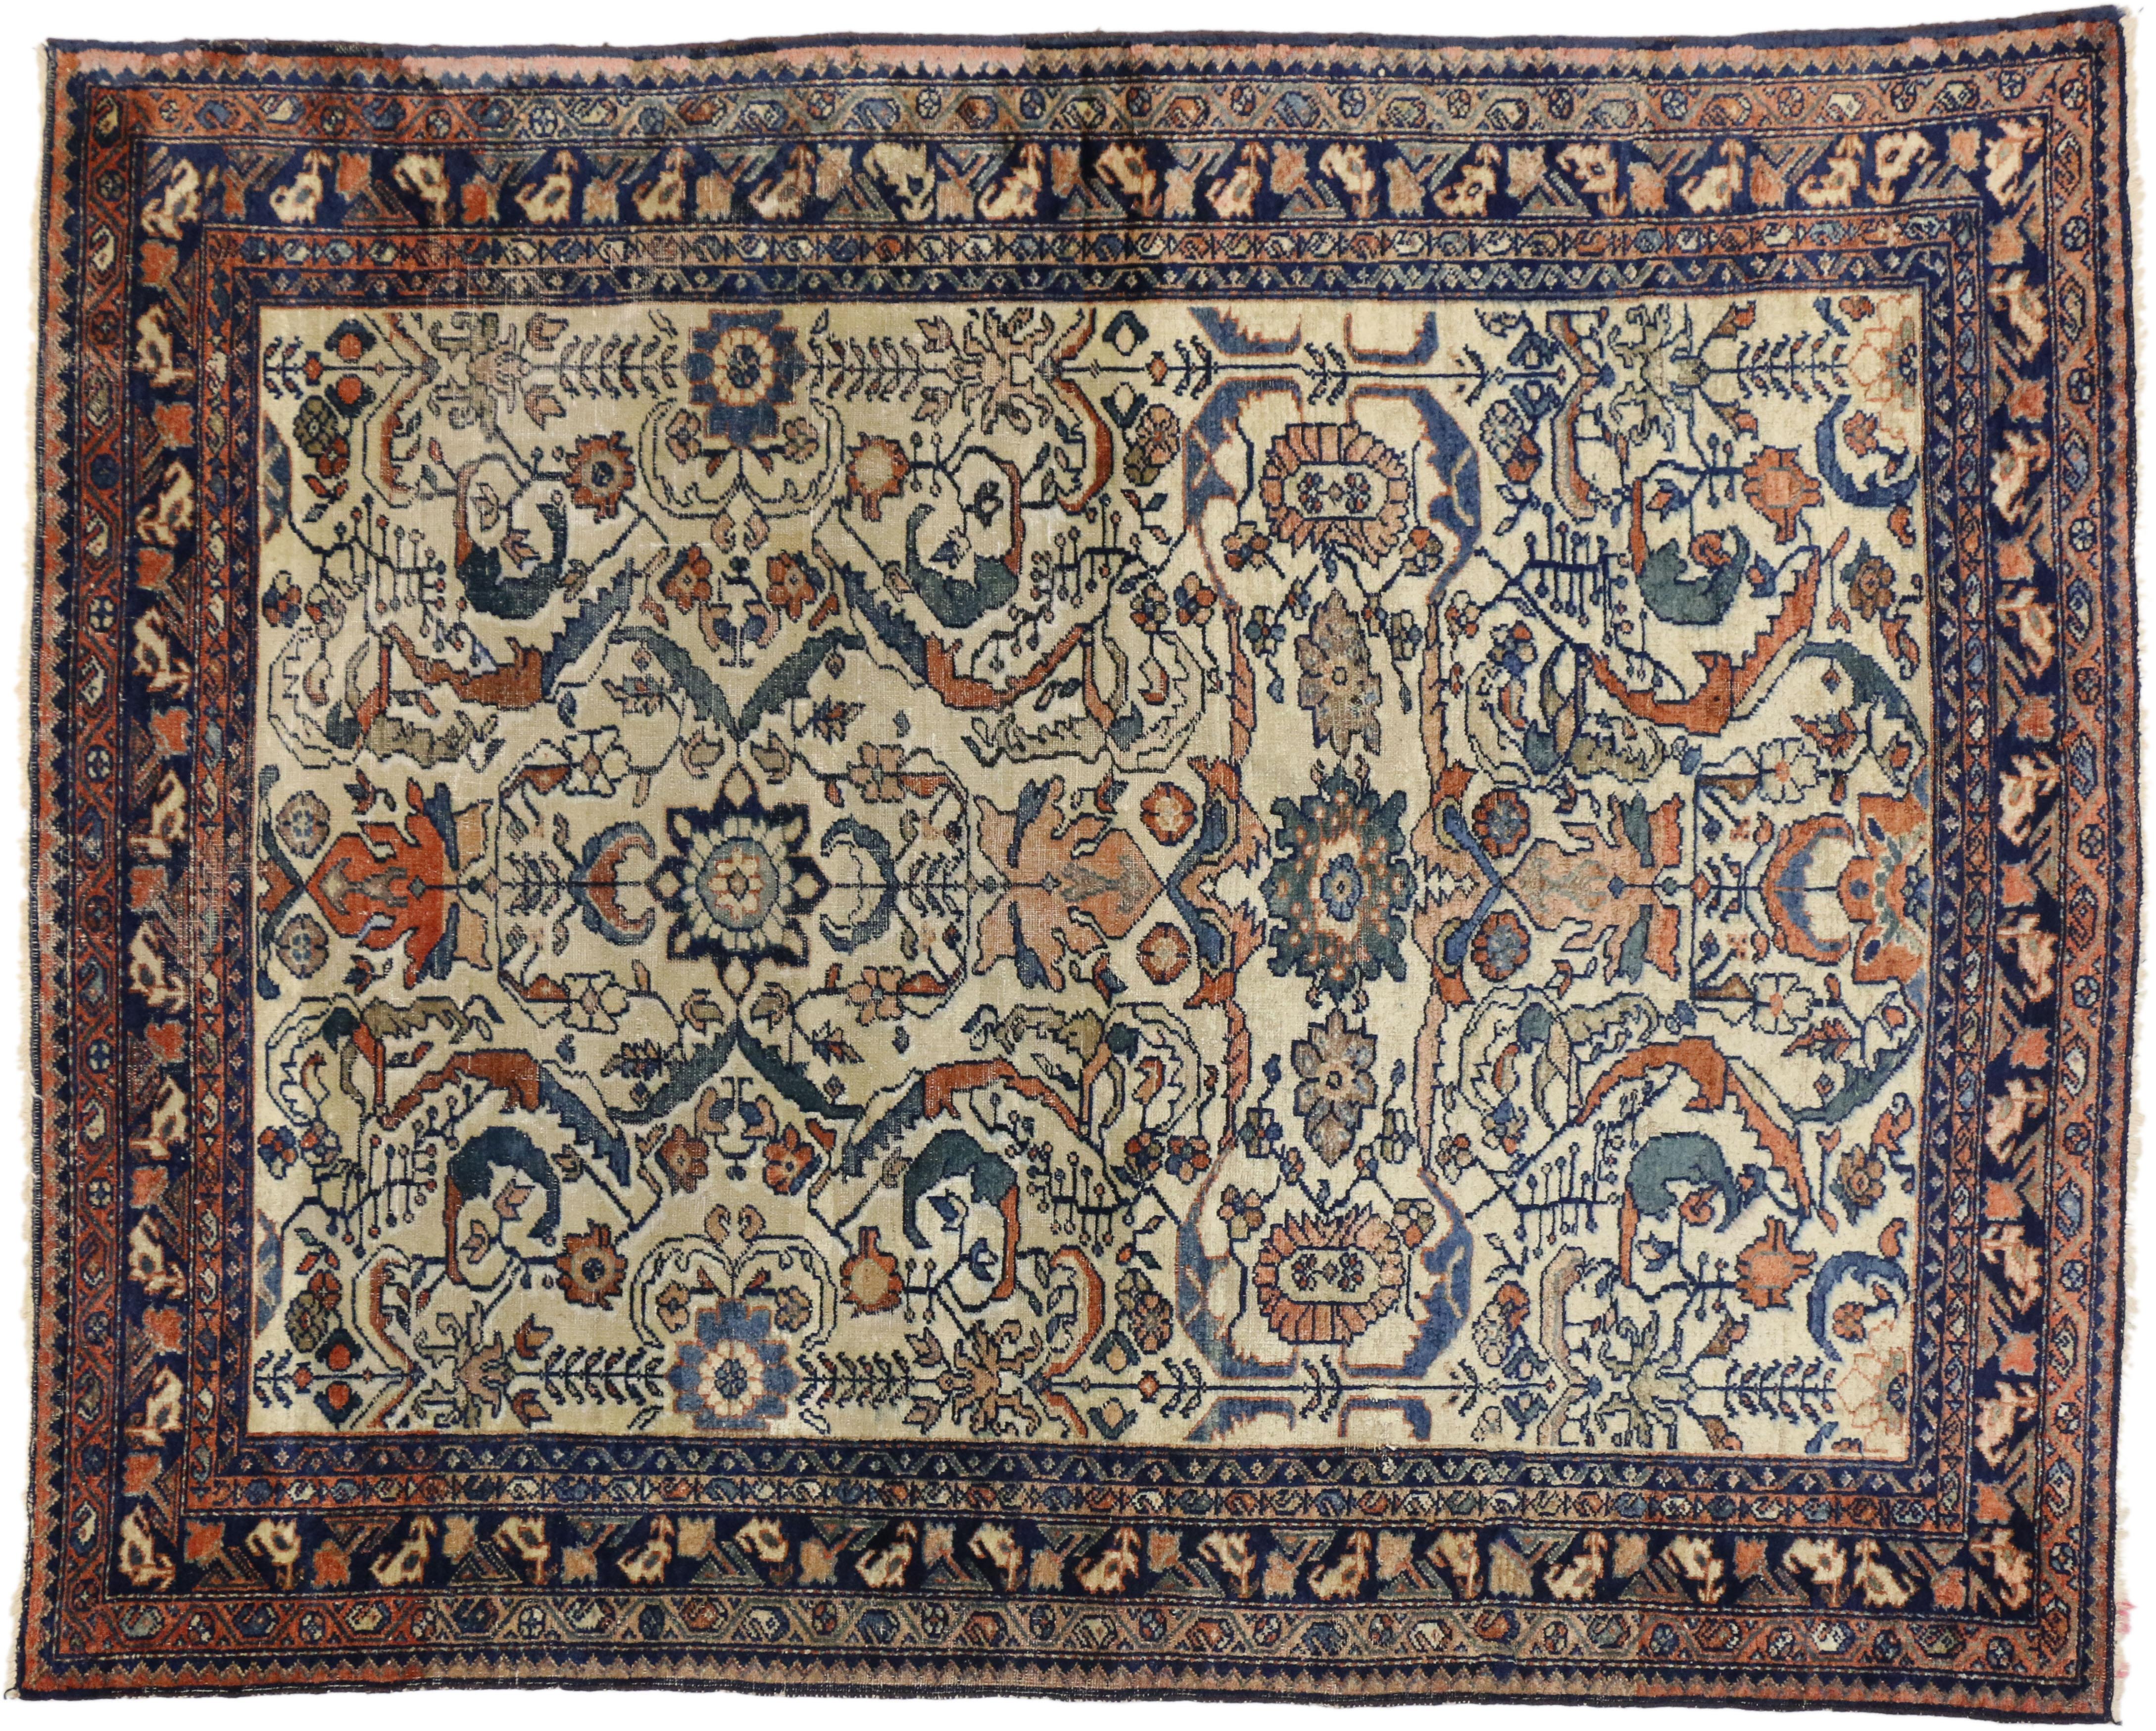 20th Century Antique Persian Lilihan Area Rug with Rustic Romantic Industrial Style